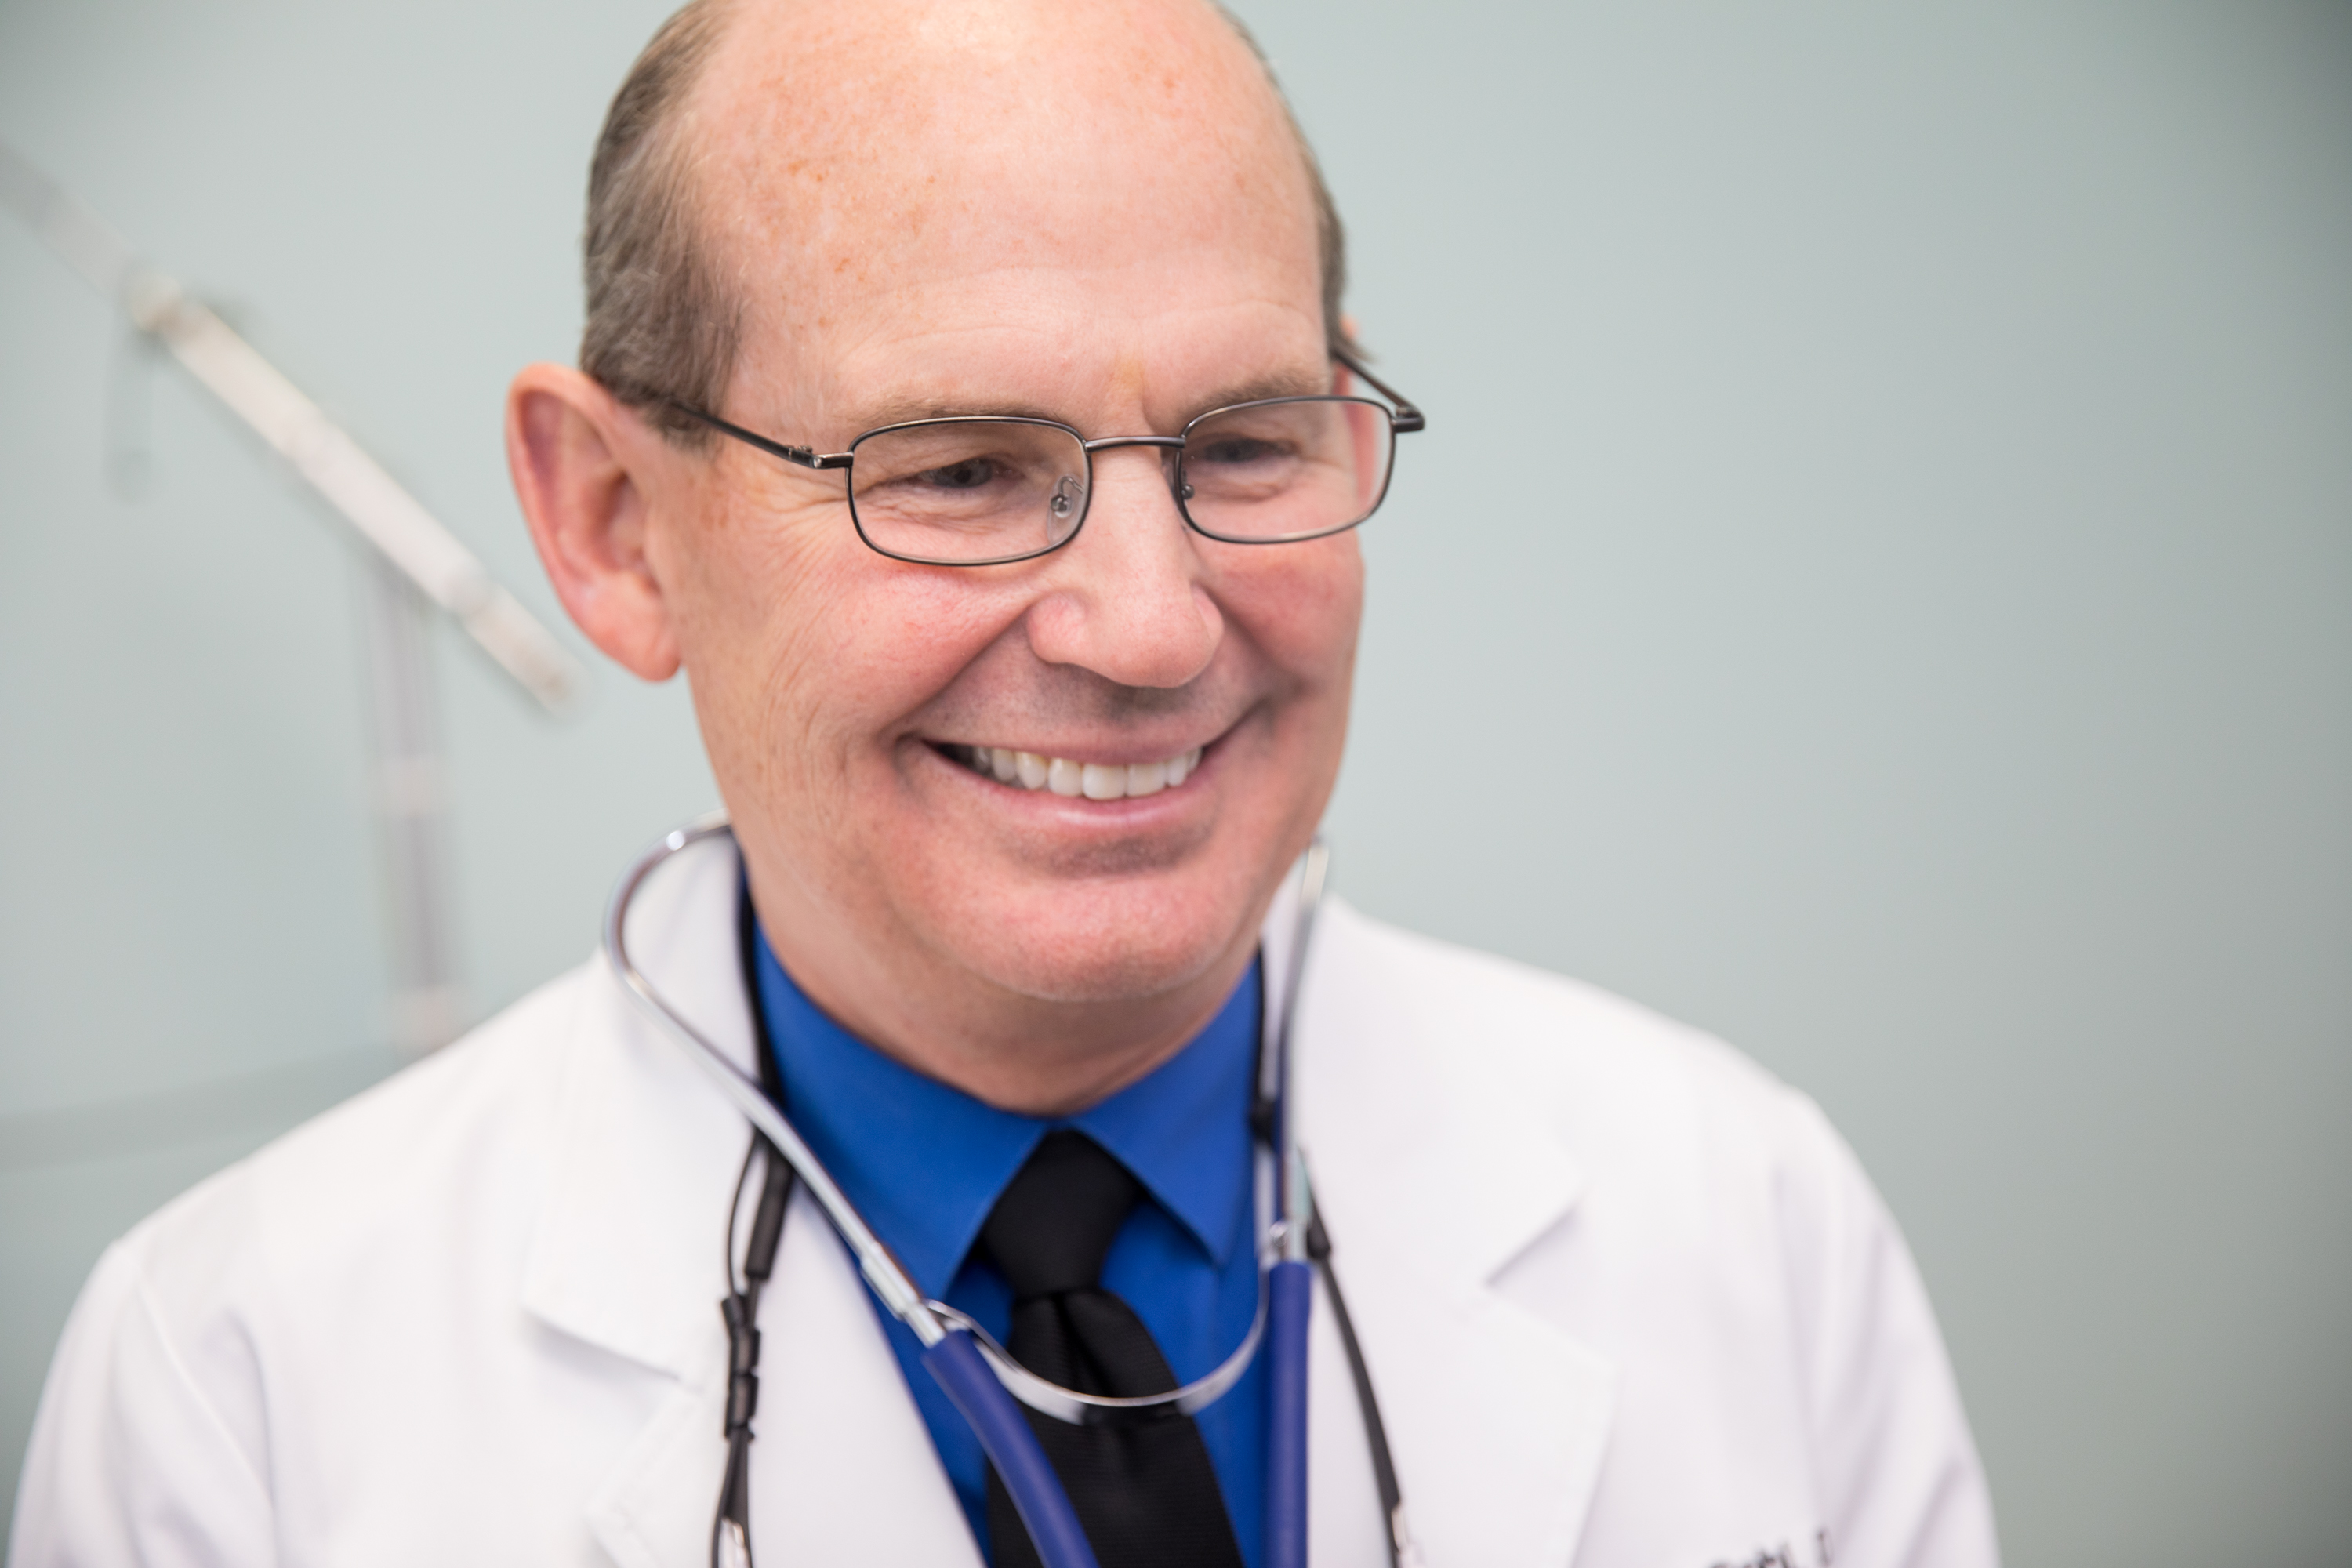 An image of Dr. Michael Sohl.